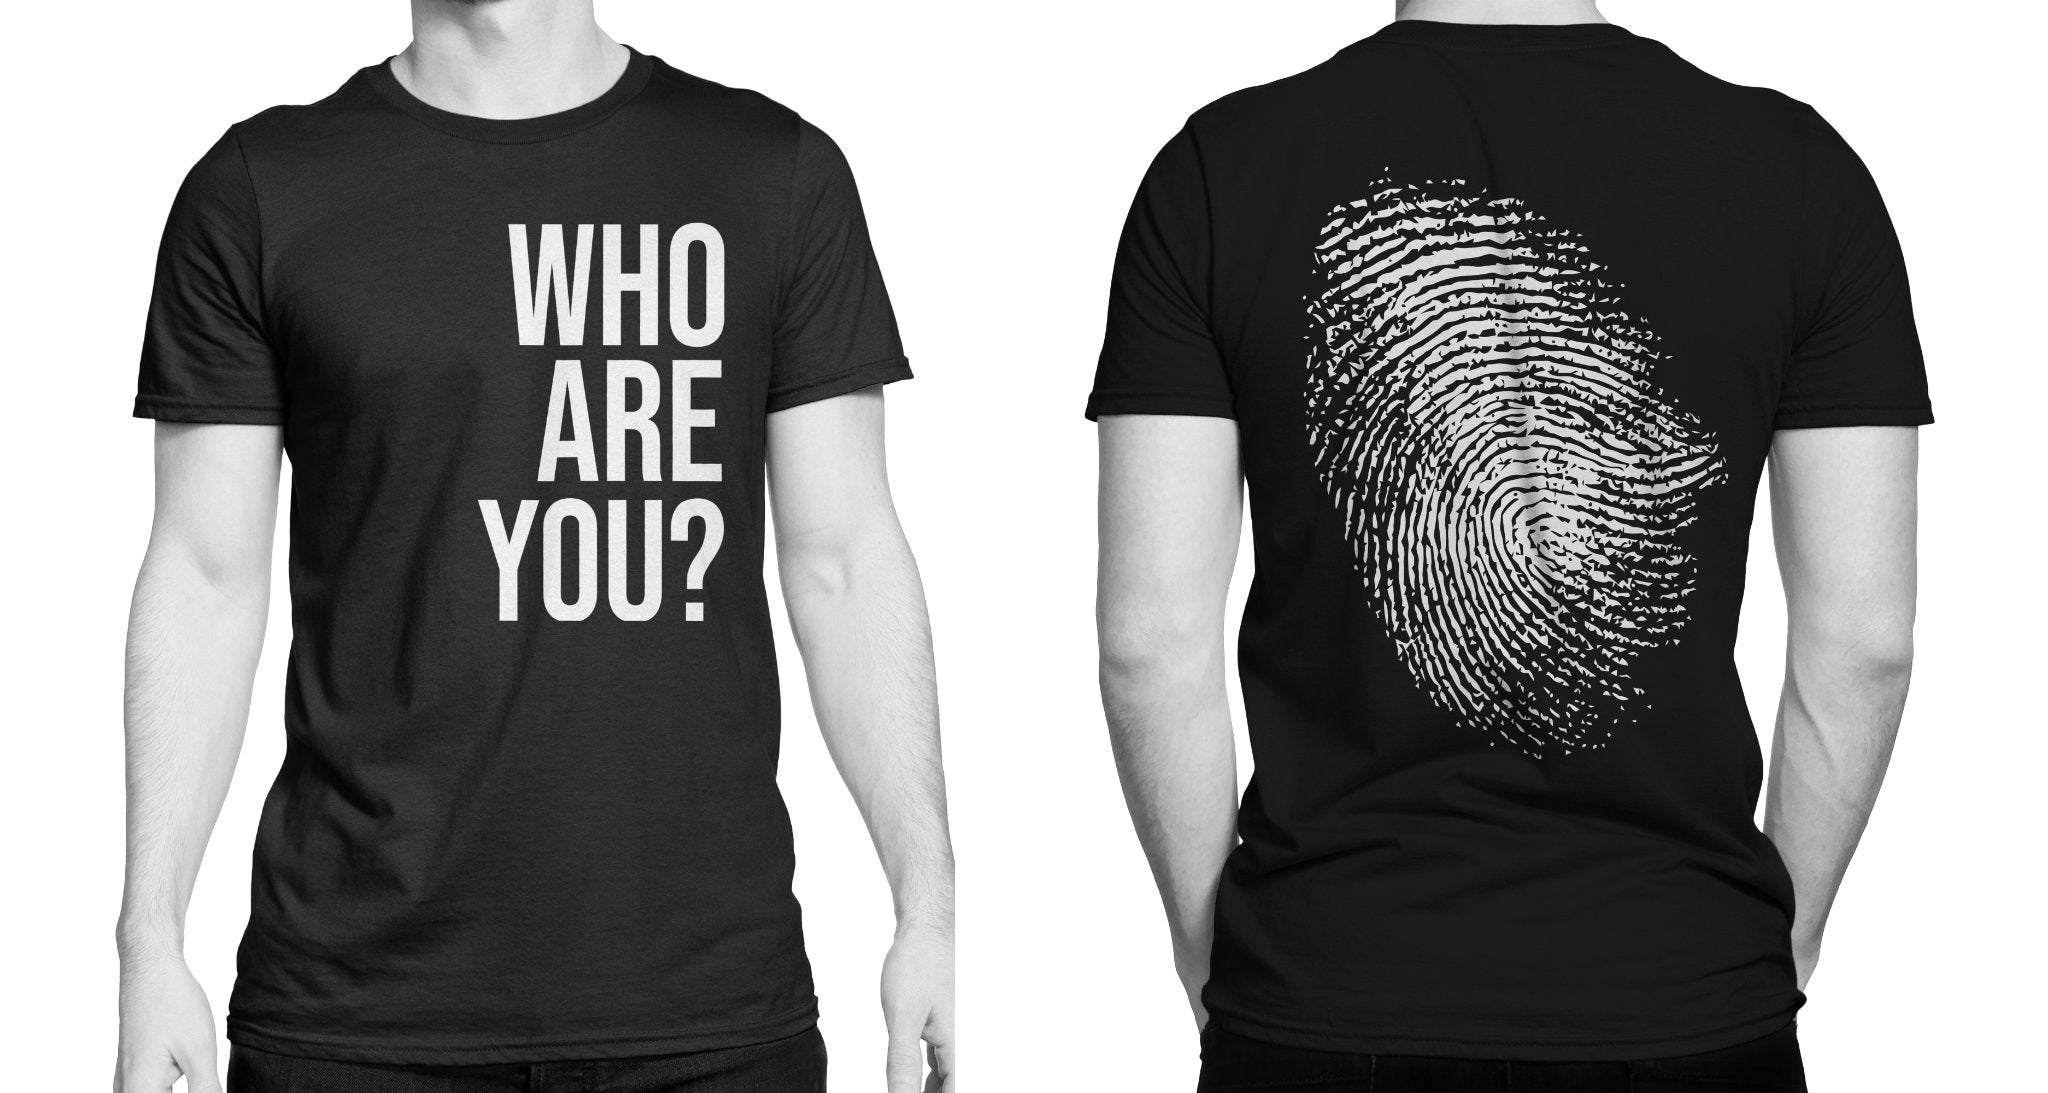 Who Are You? T-shirt